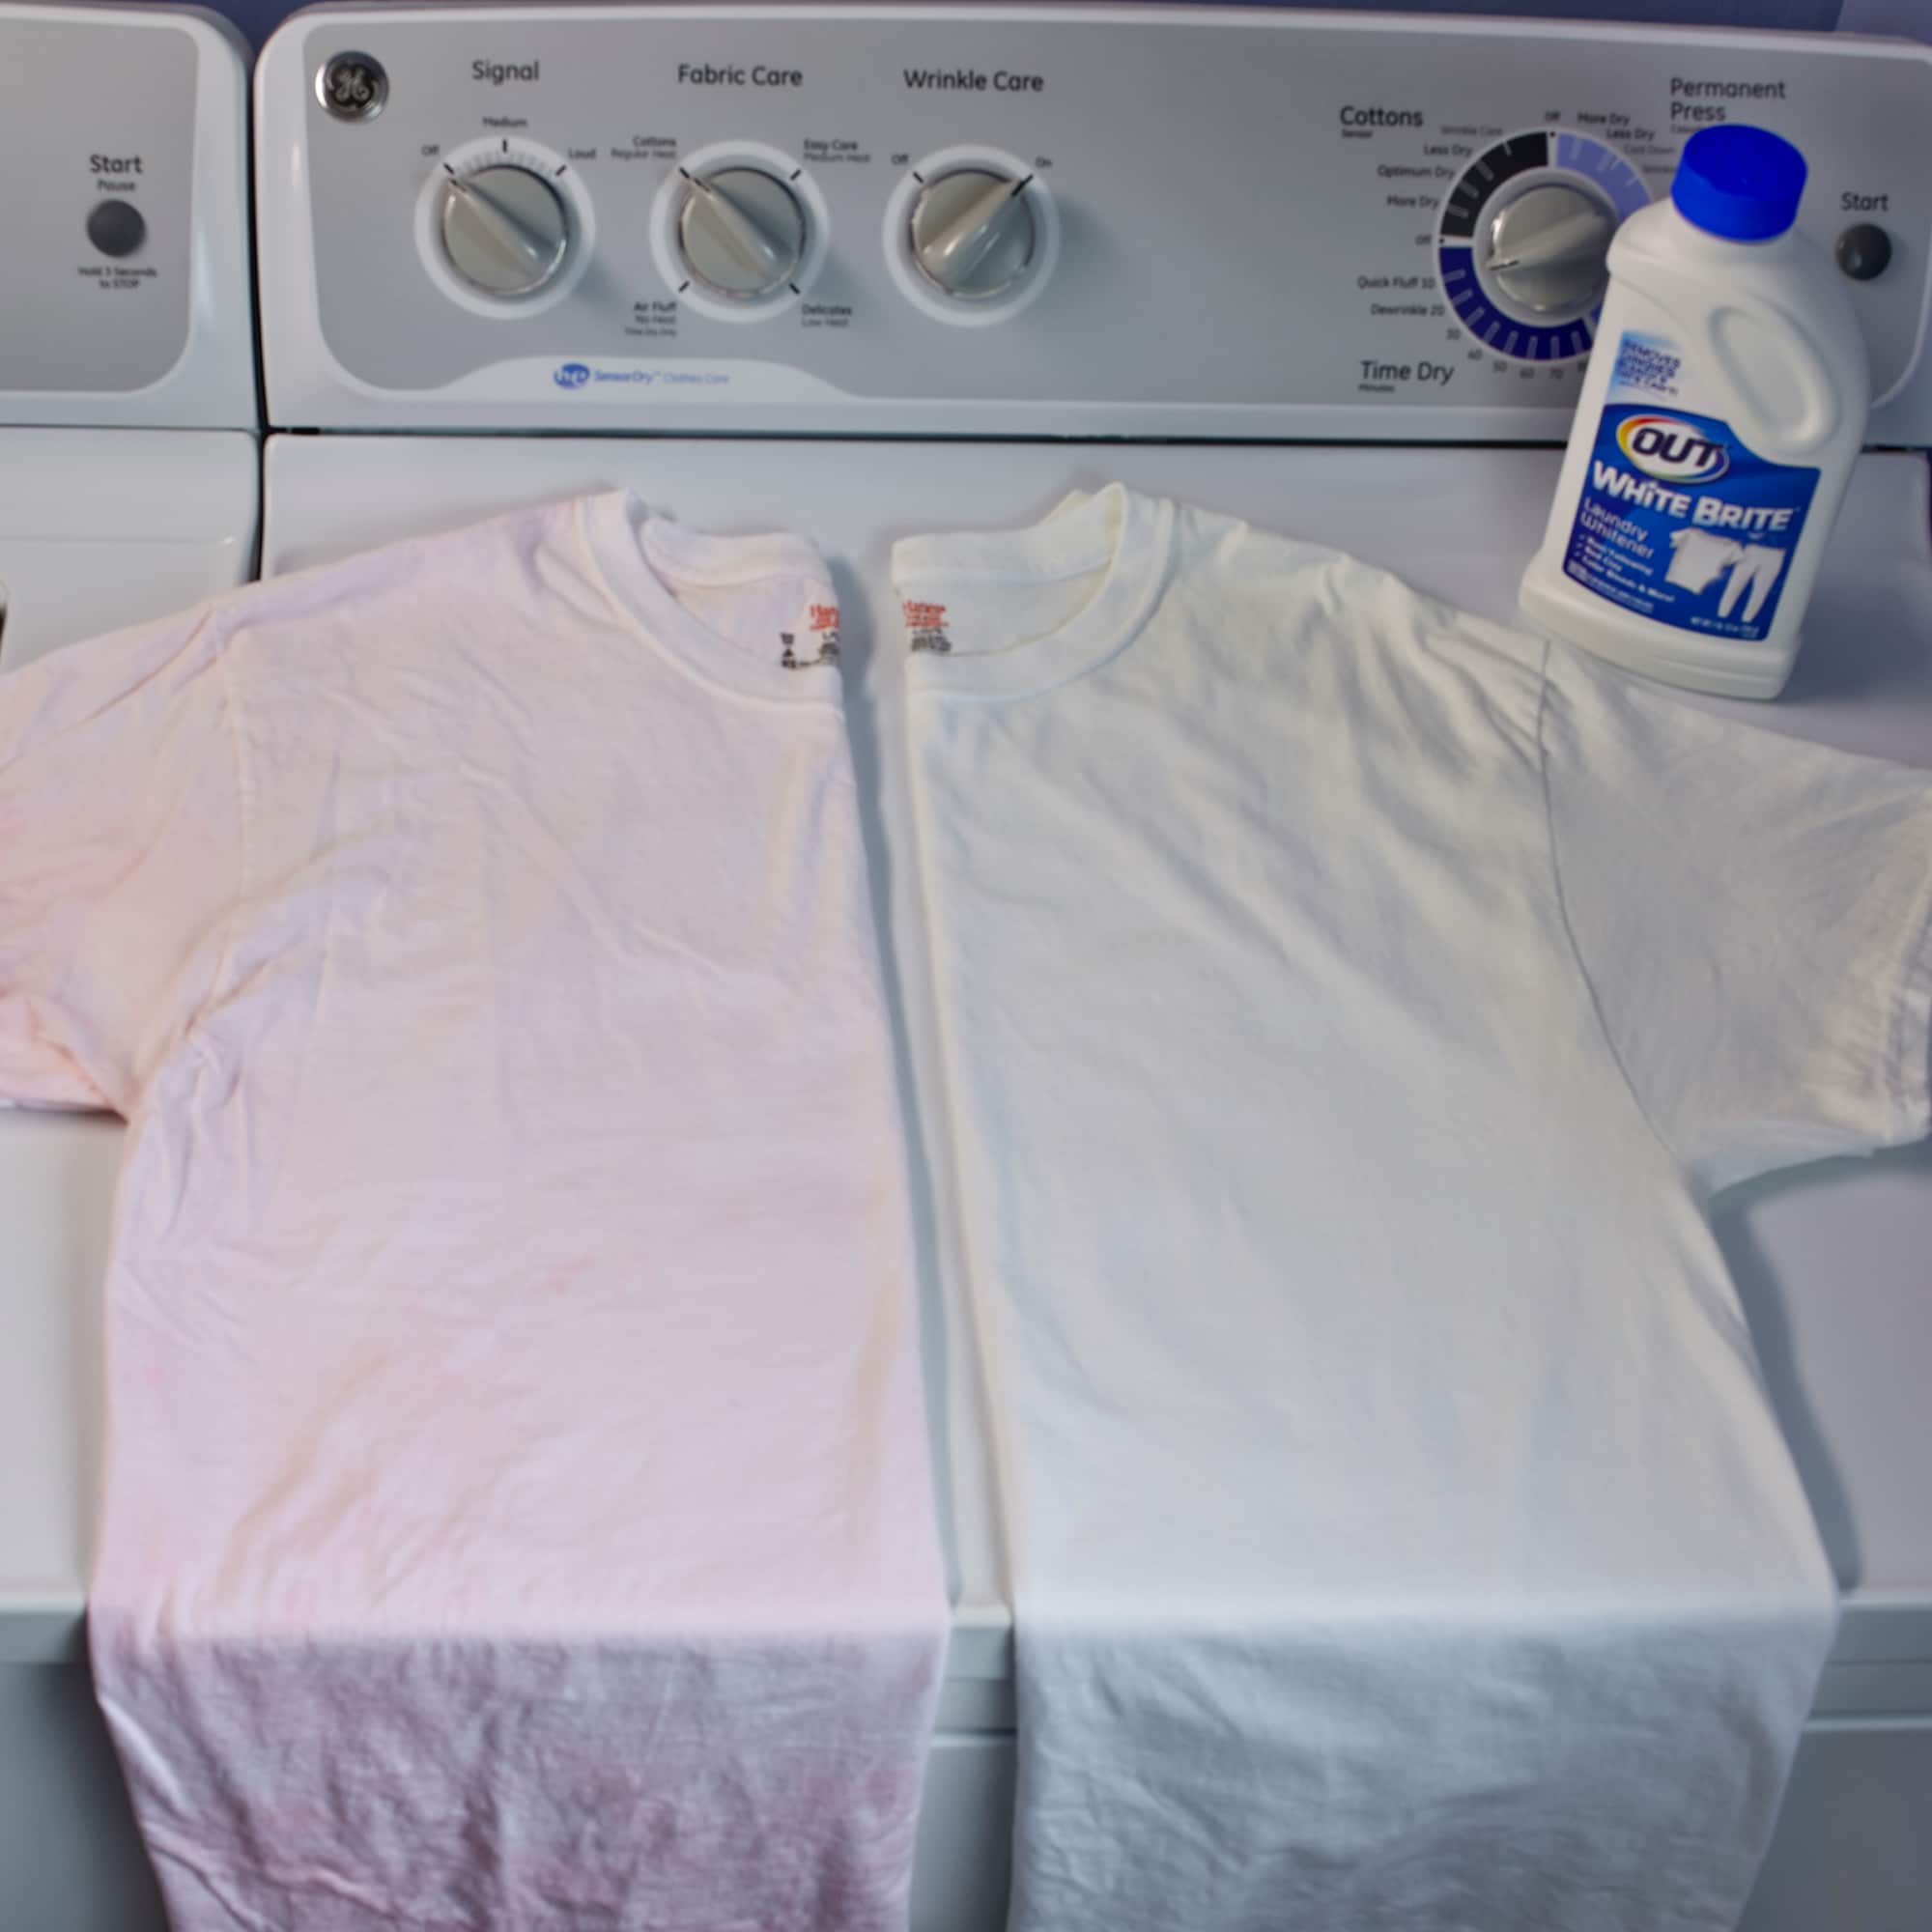 How to use bleach in laundry: for the whitest whites